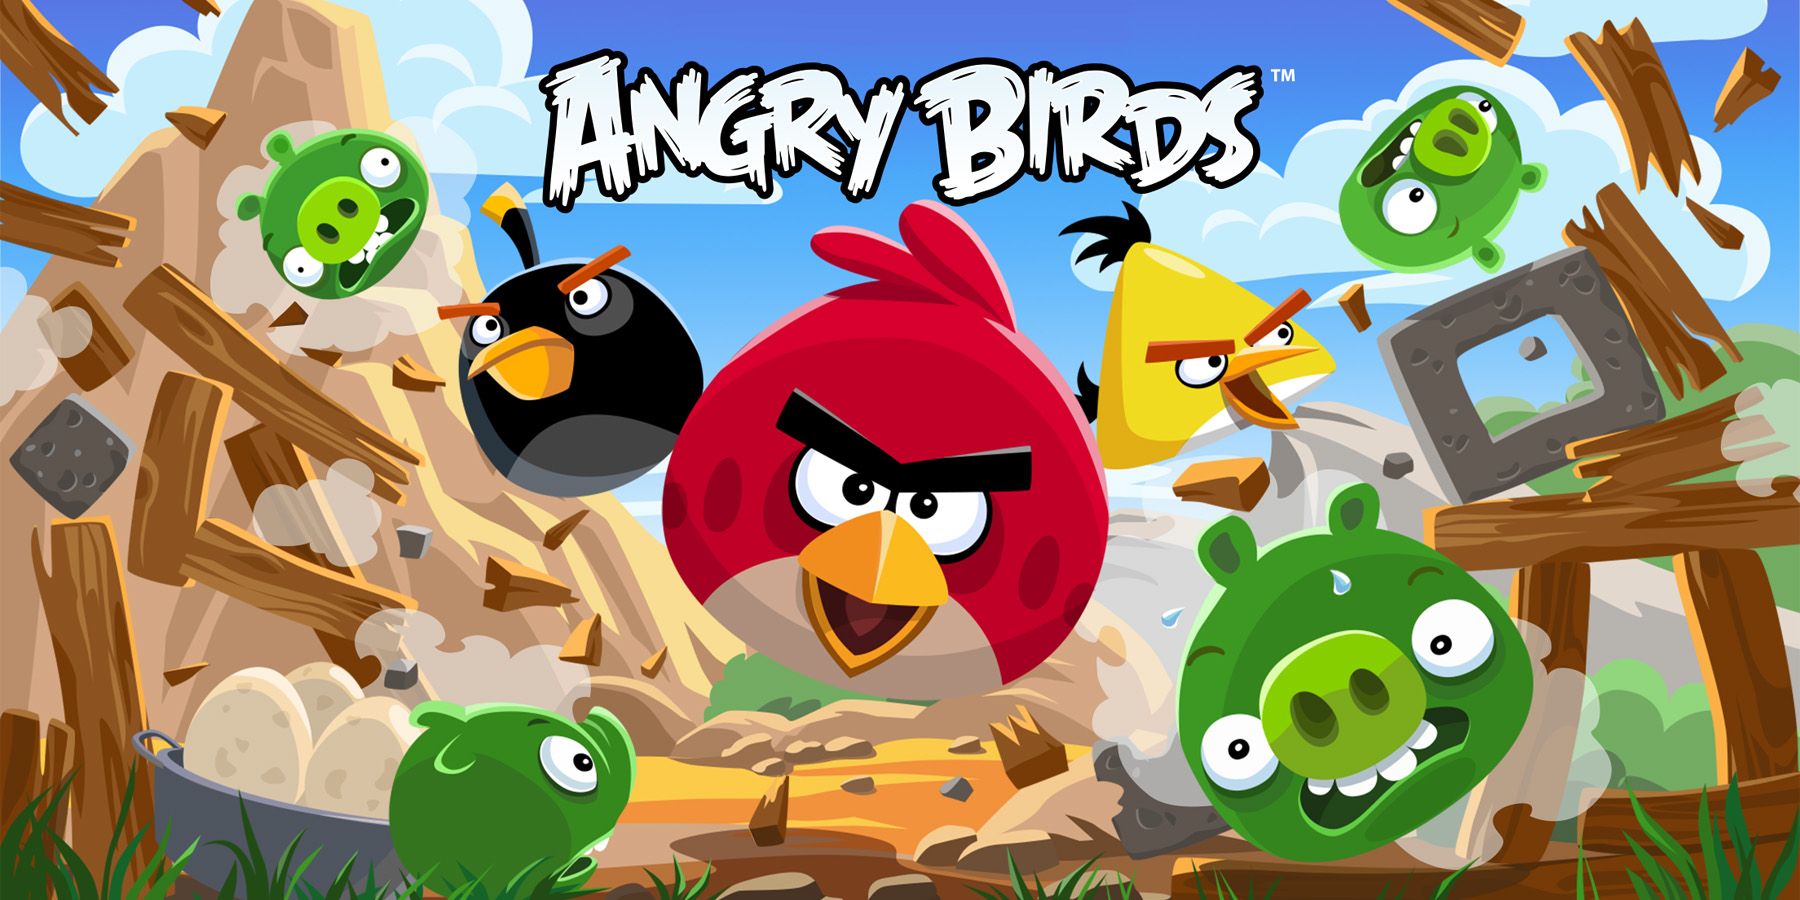 Angry Birds title art